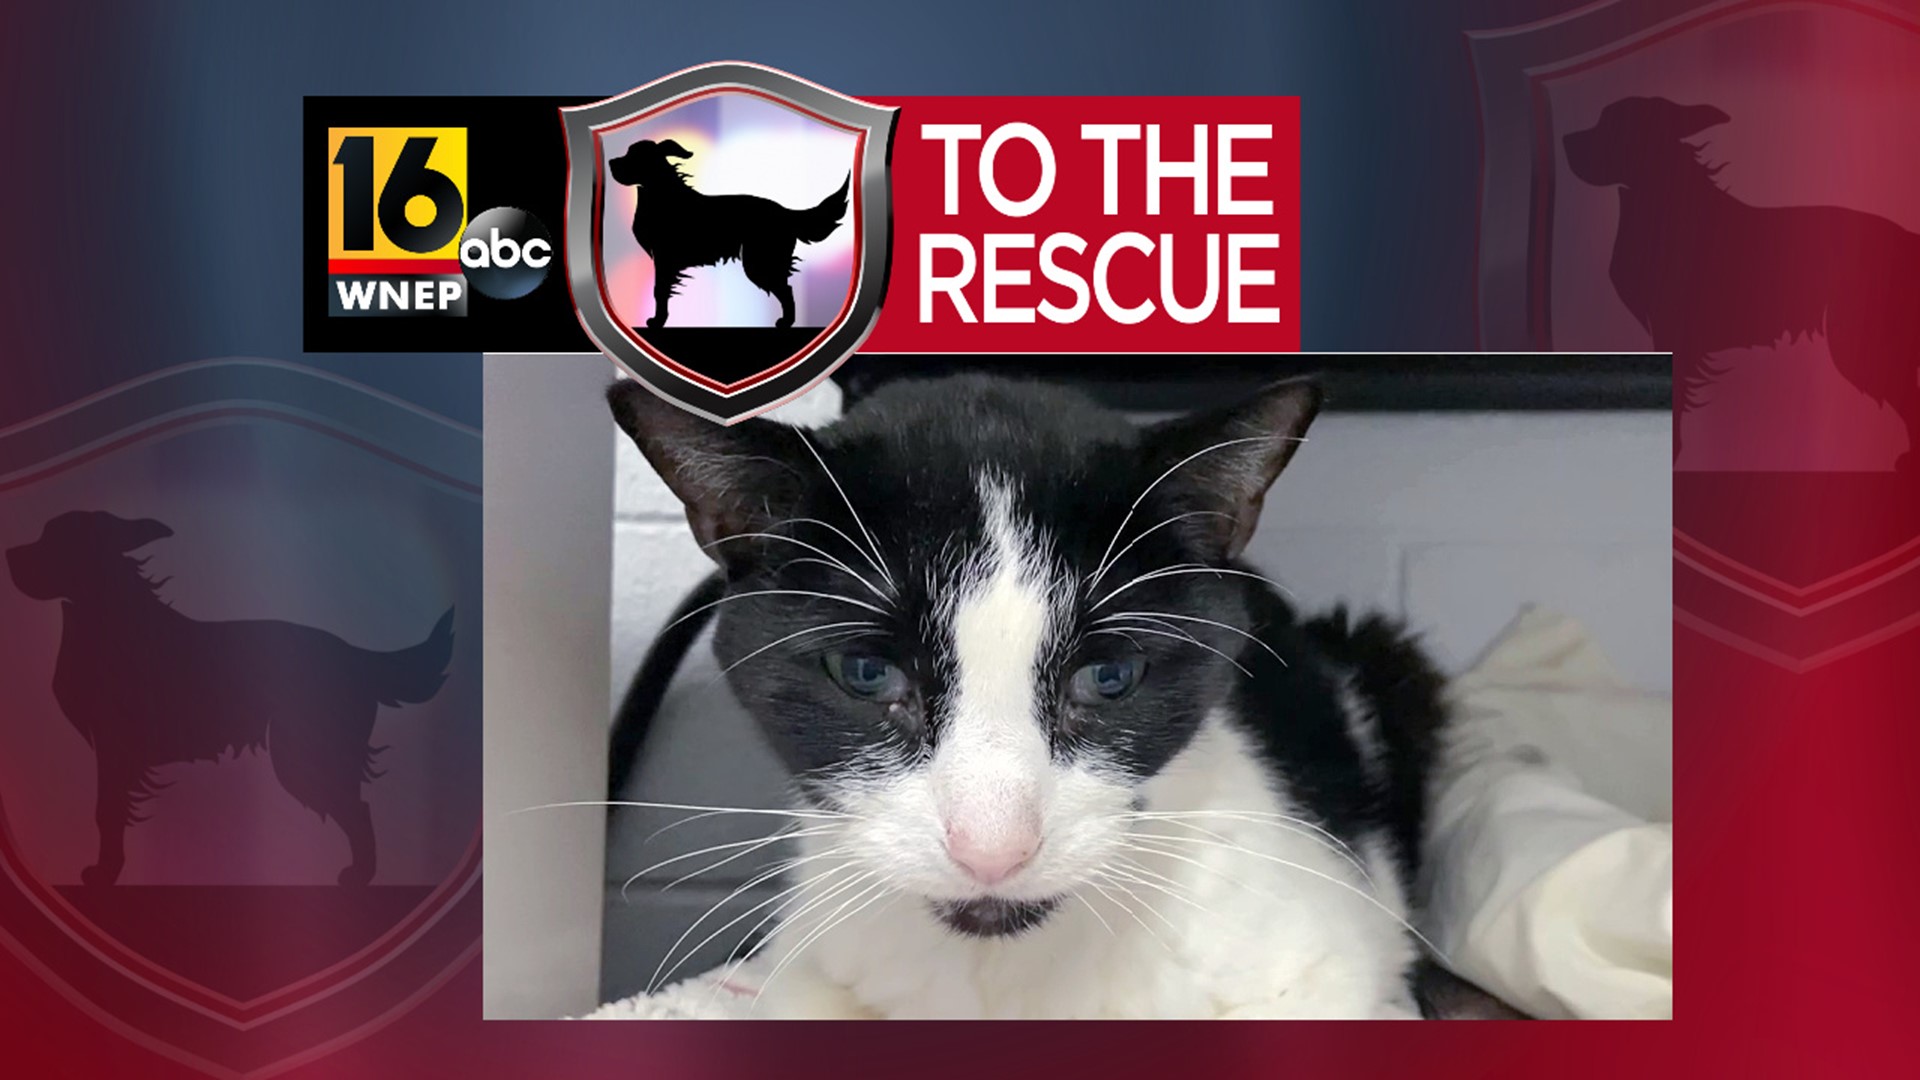 In this week's 16 To The Rescue, we meet a senior cat who needs the right home and family who will give him the chance to live comfortably in his older age.